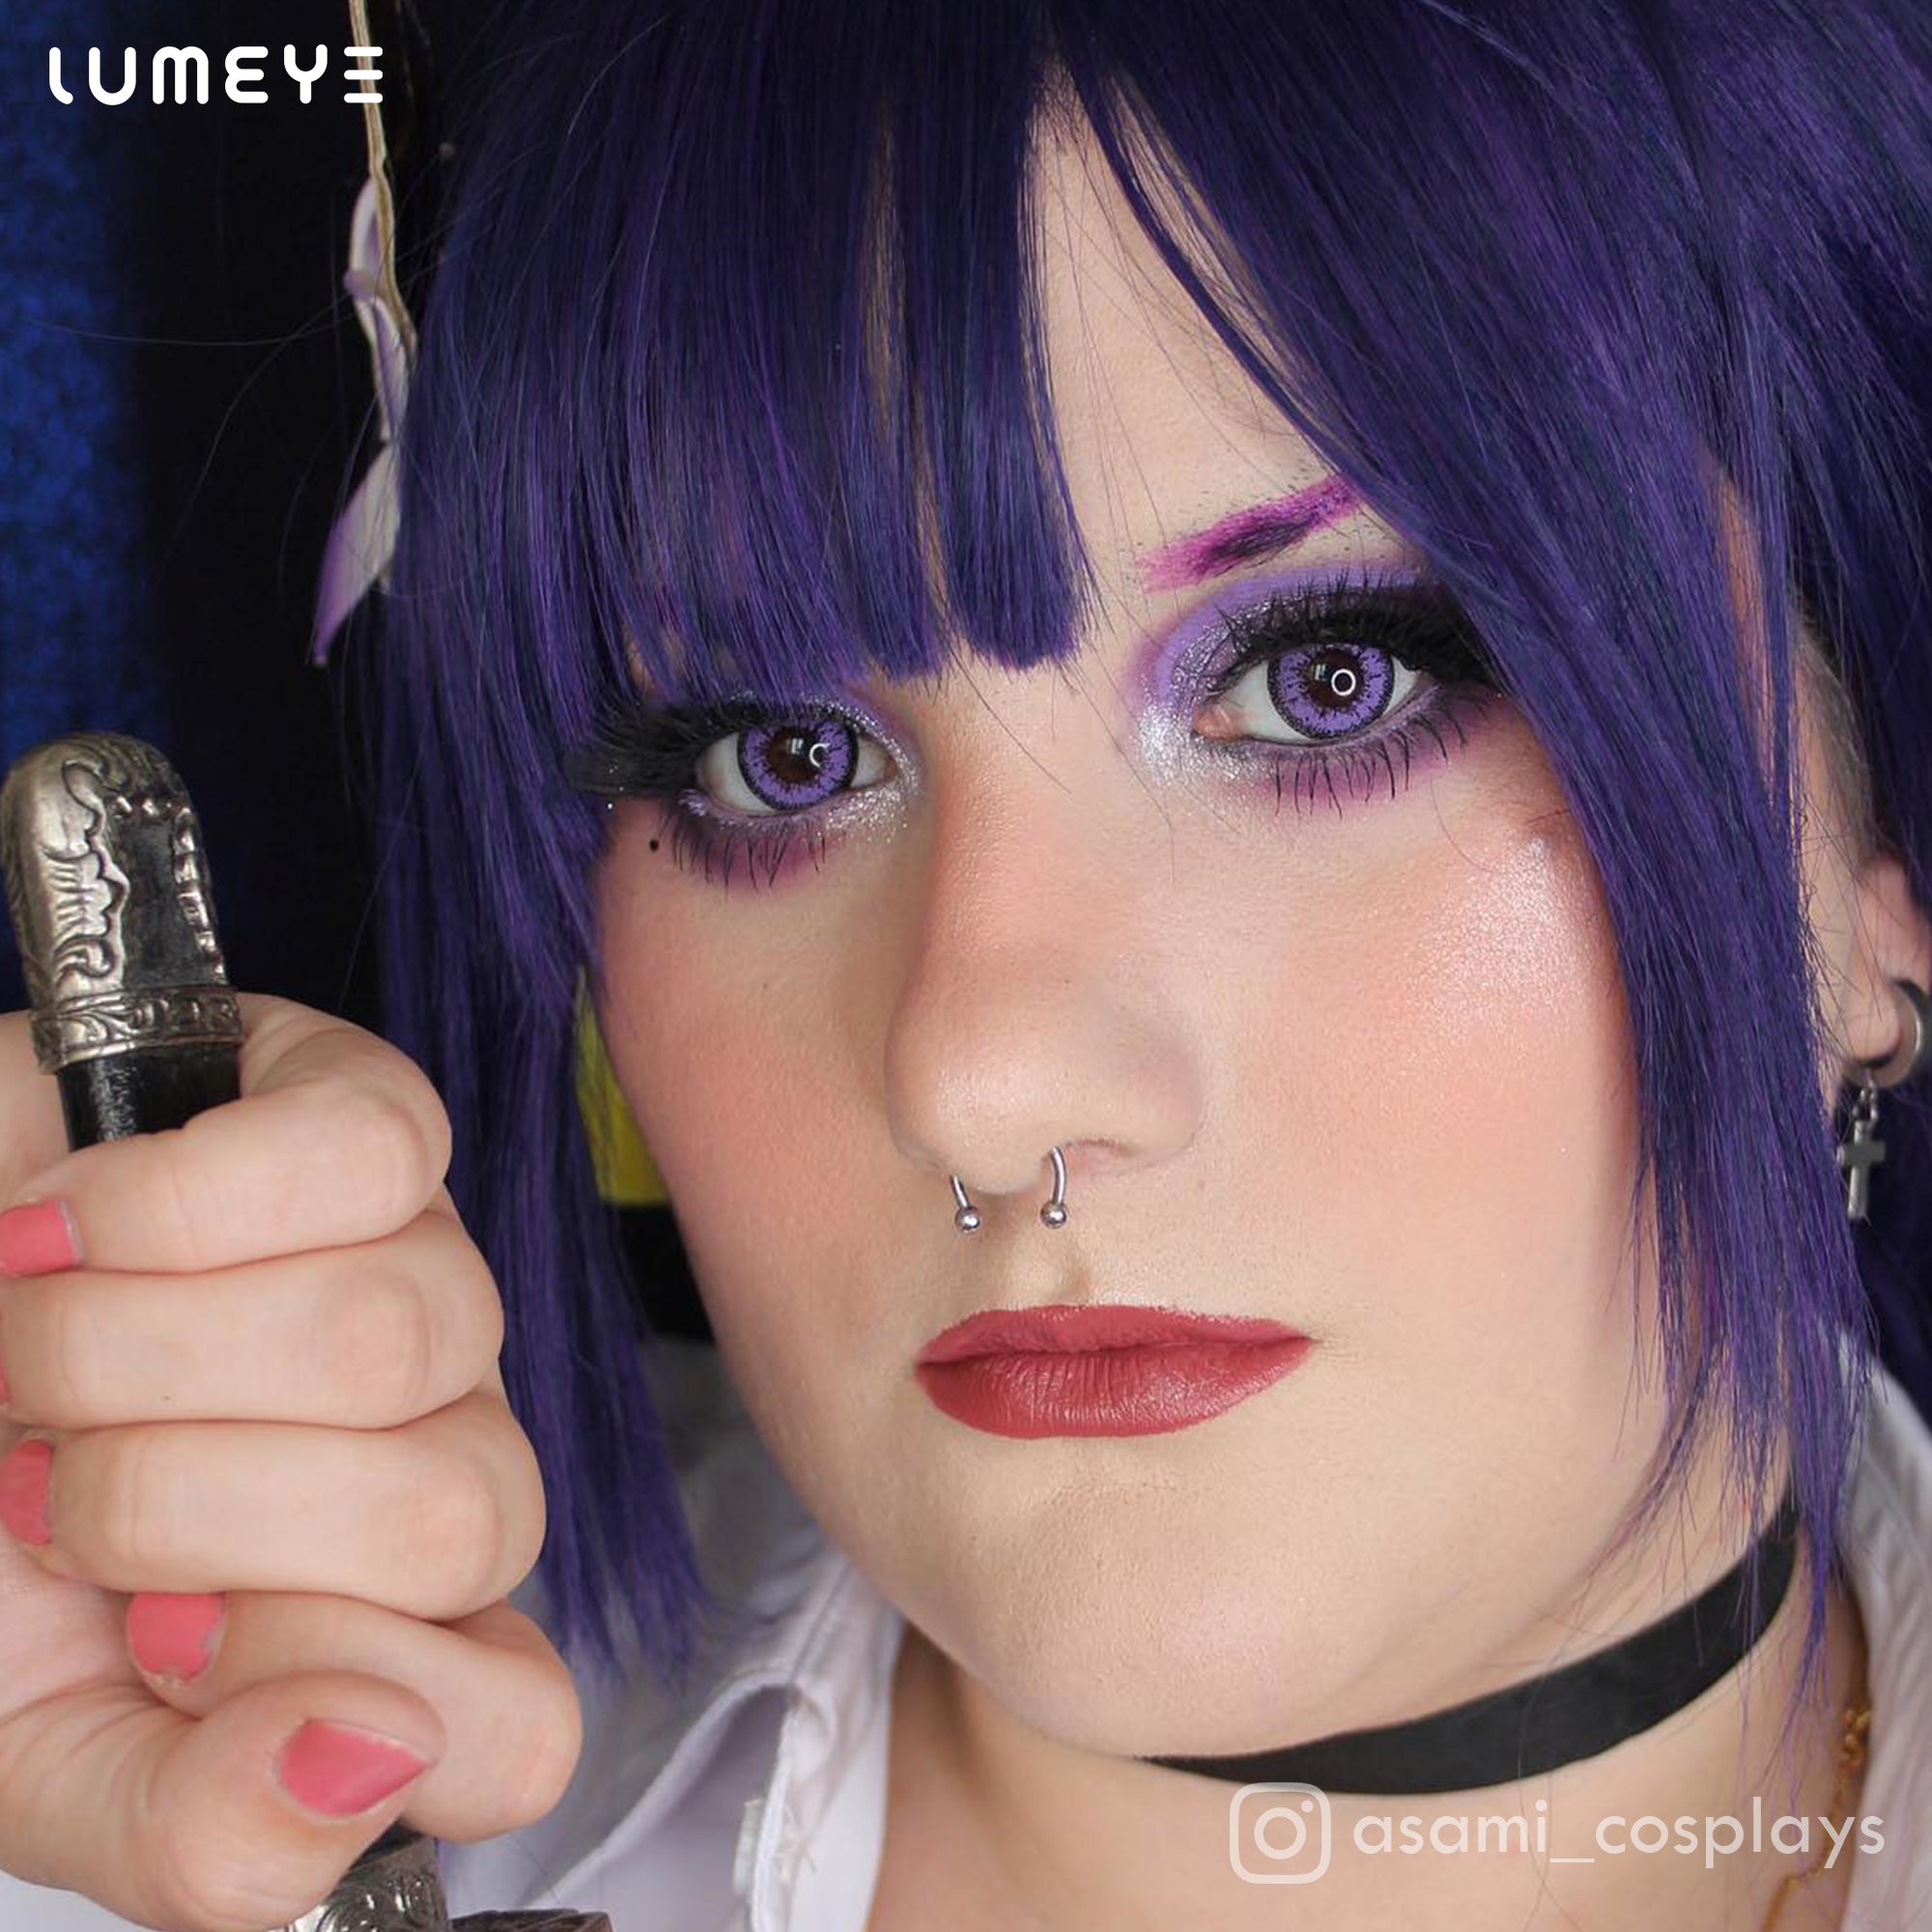 Best COLORED CONTACTS - LUMEYE Will Purple Colored Contact Lenses - LUMEYE